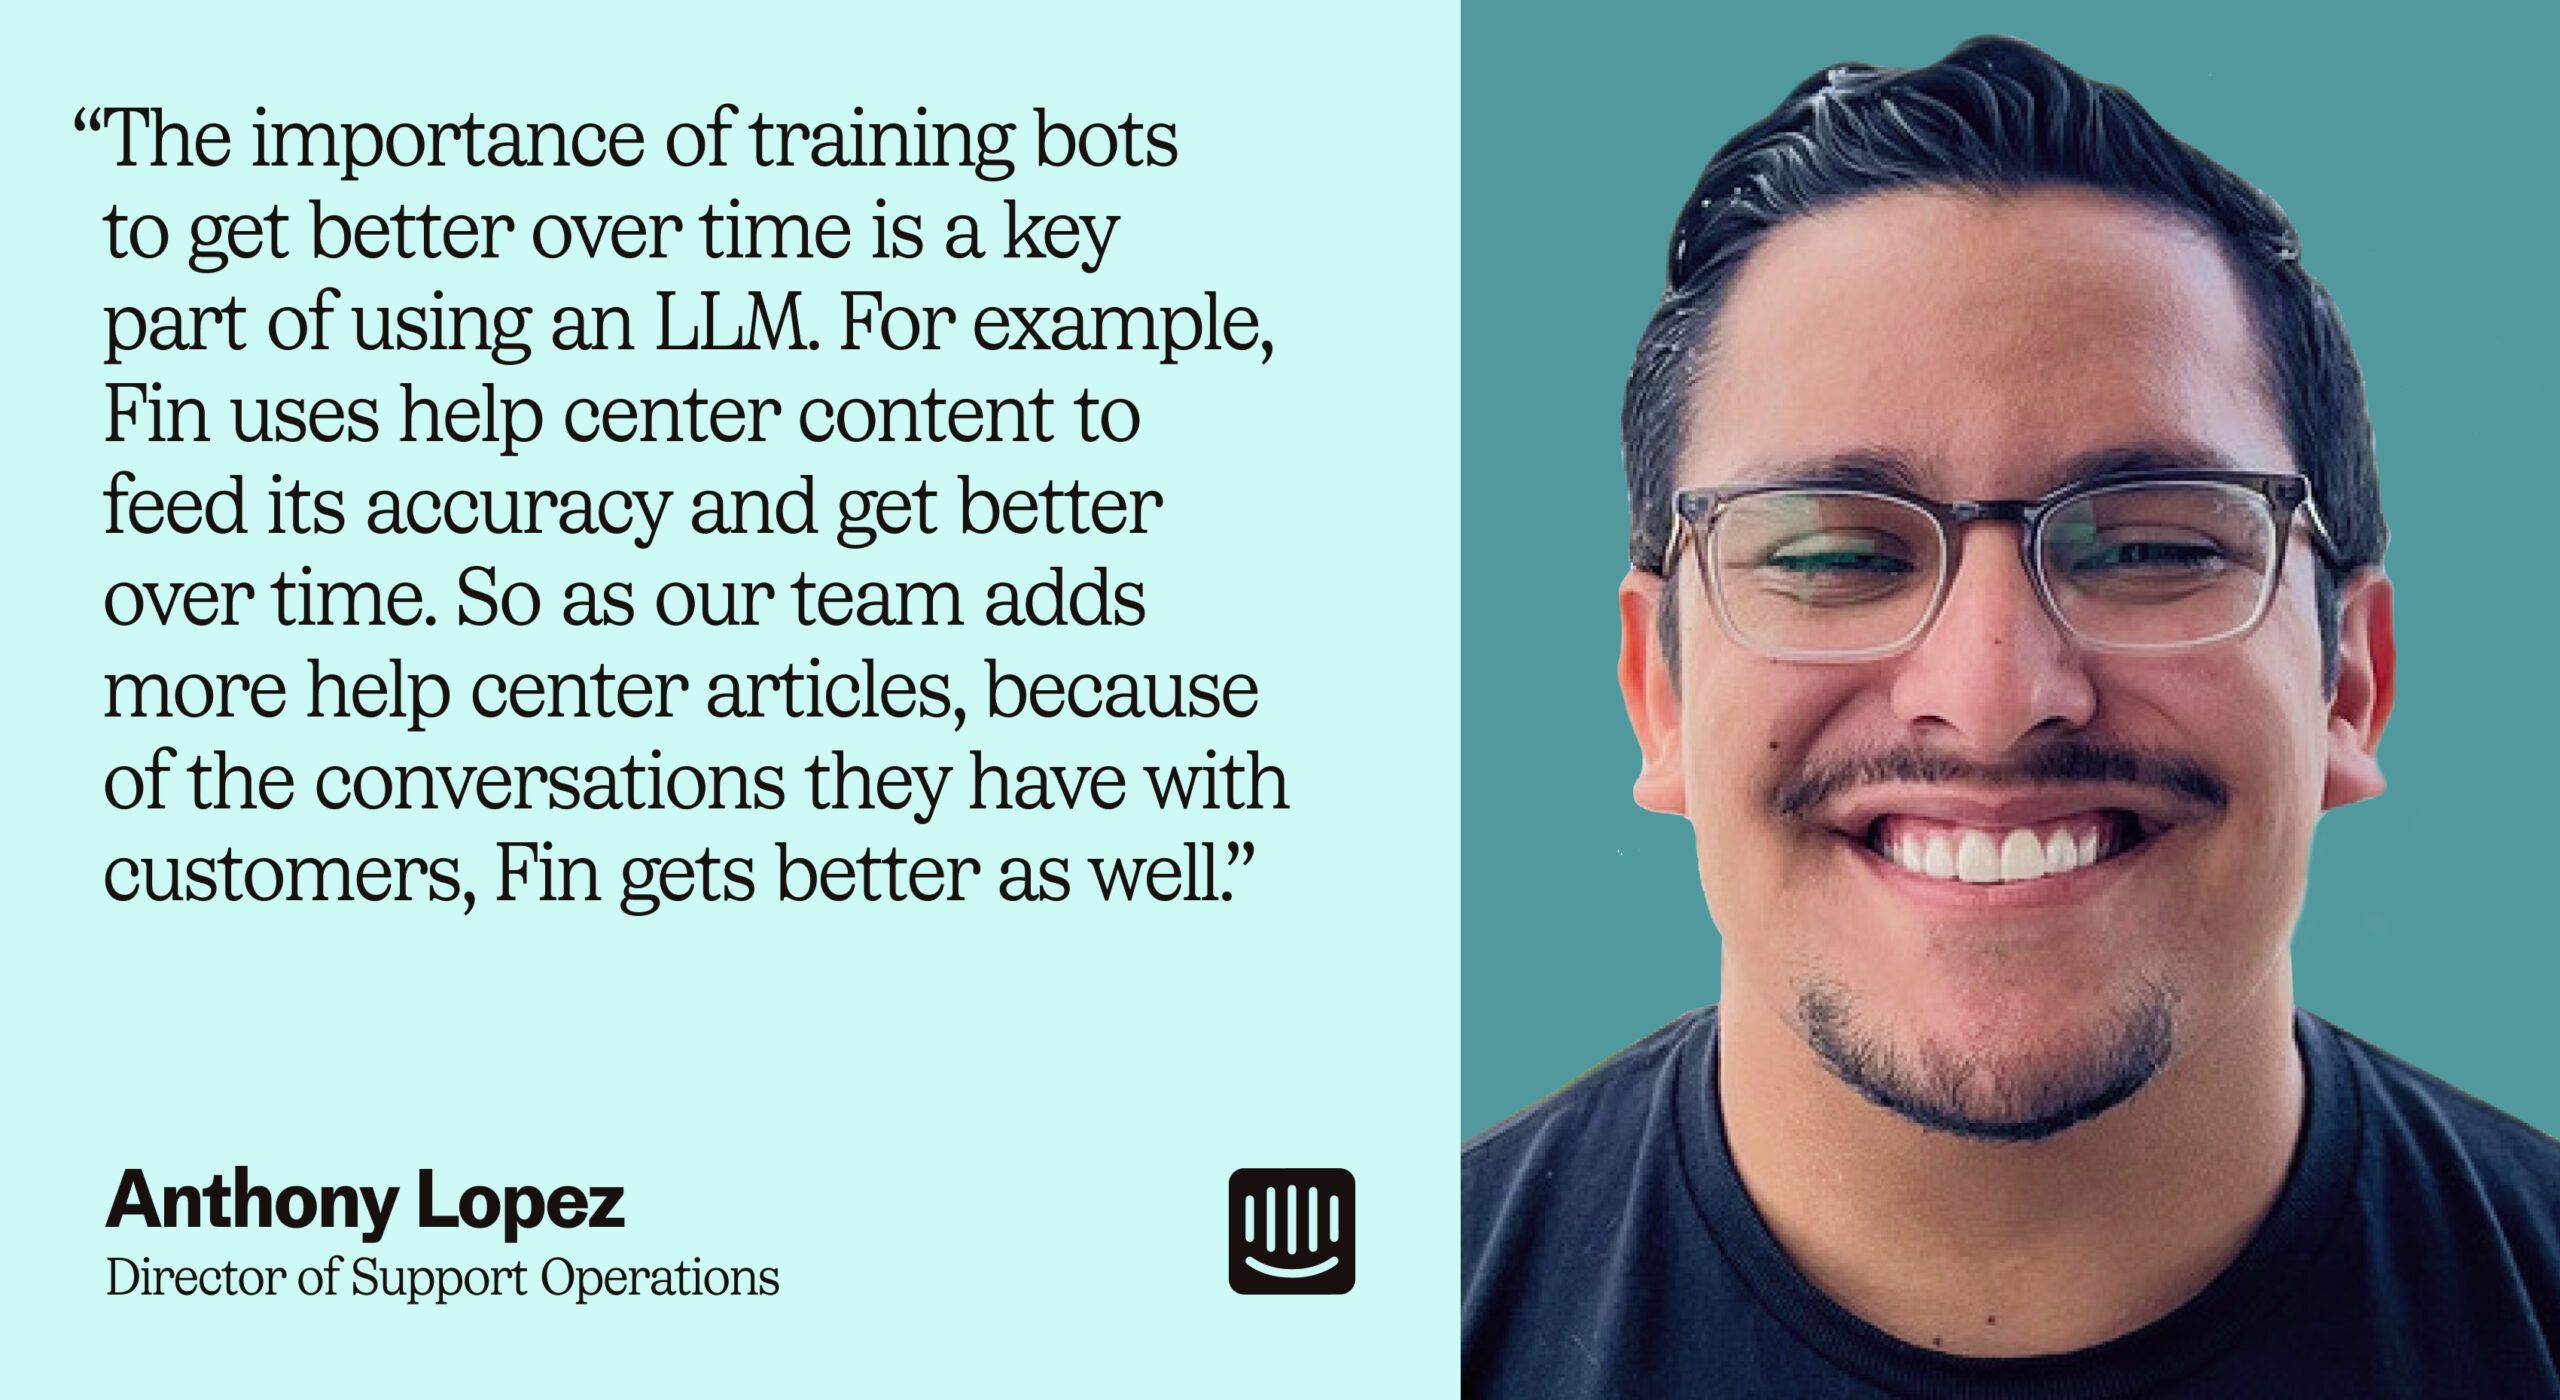 “The importance of training bots to get better over time is a key part of using an LLM. For example, Fin uses help center content to feed its accuracy and get better over time. So as our team adds more help center articles, because of the conversations they have with customers, Fin gets better as well.” – Anthony Lopez, Director of Support Operations at Intercom